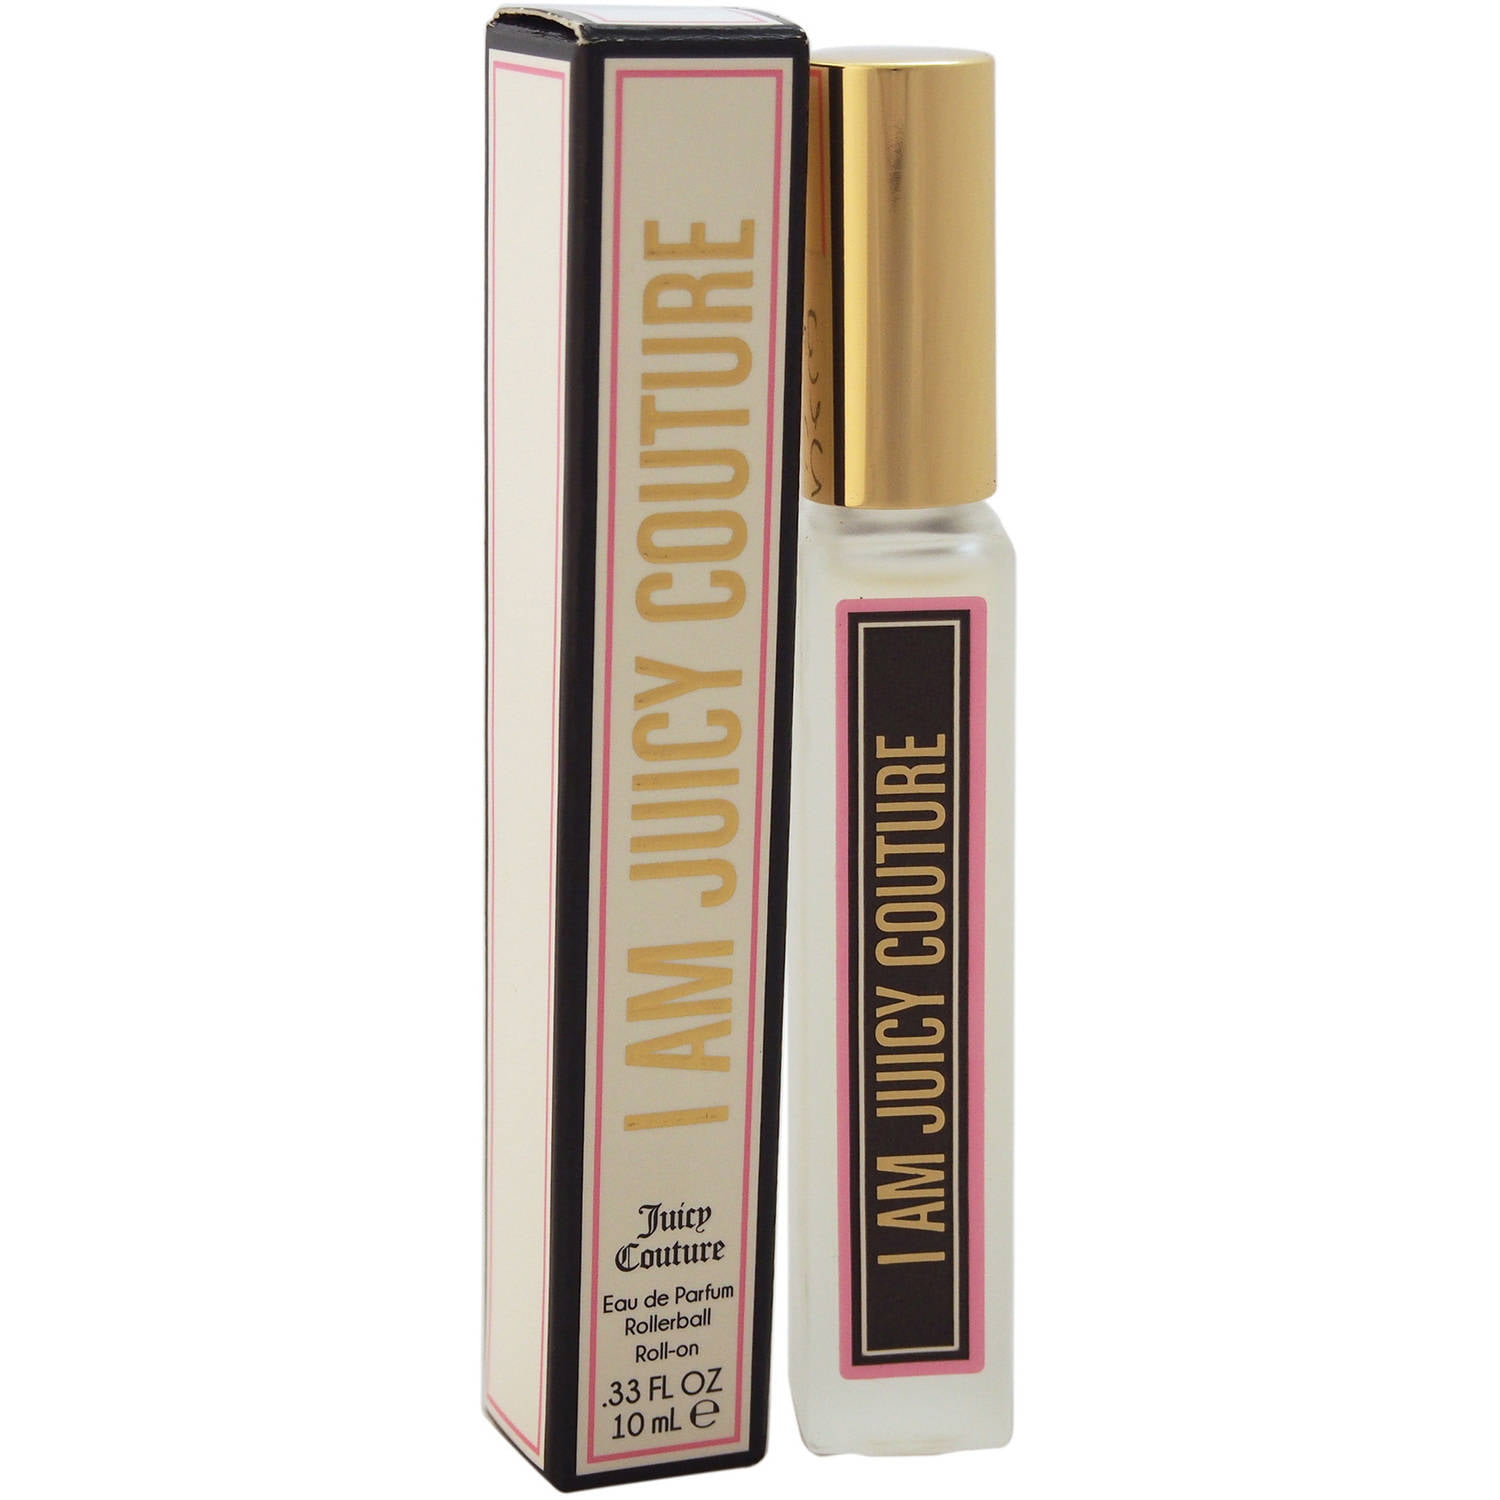 Juicy Couture I Am Juicy Couture EDP Rollerball for Women, 0.33 oz ...